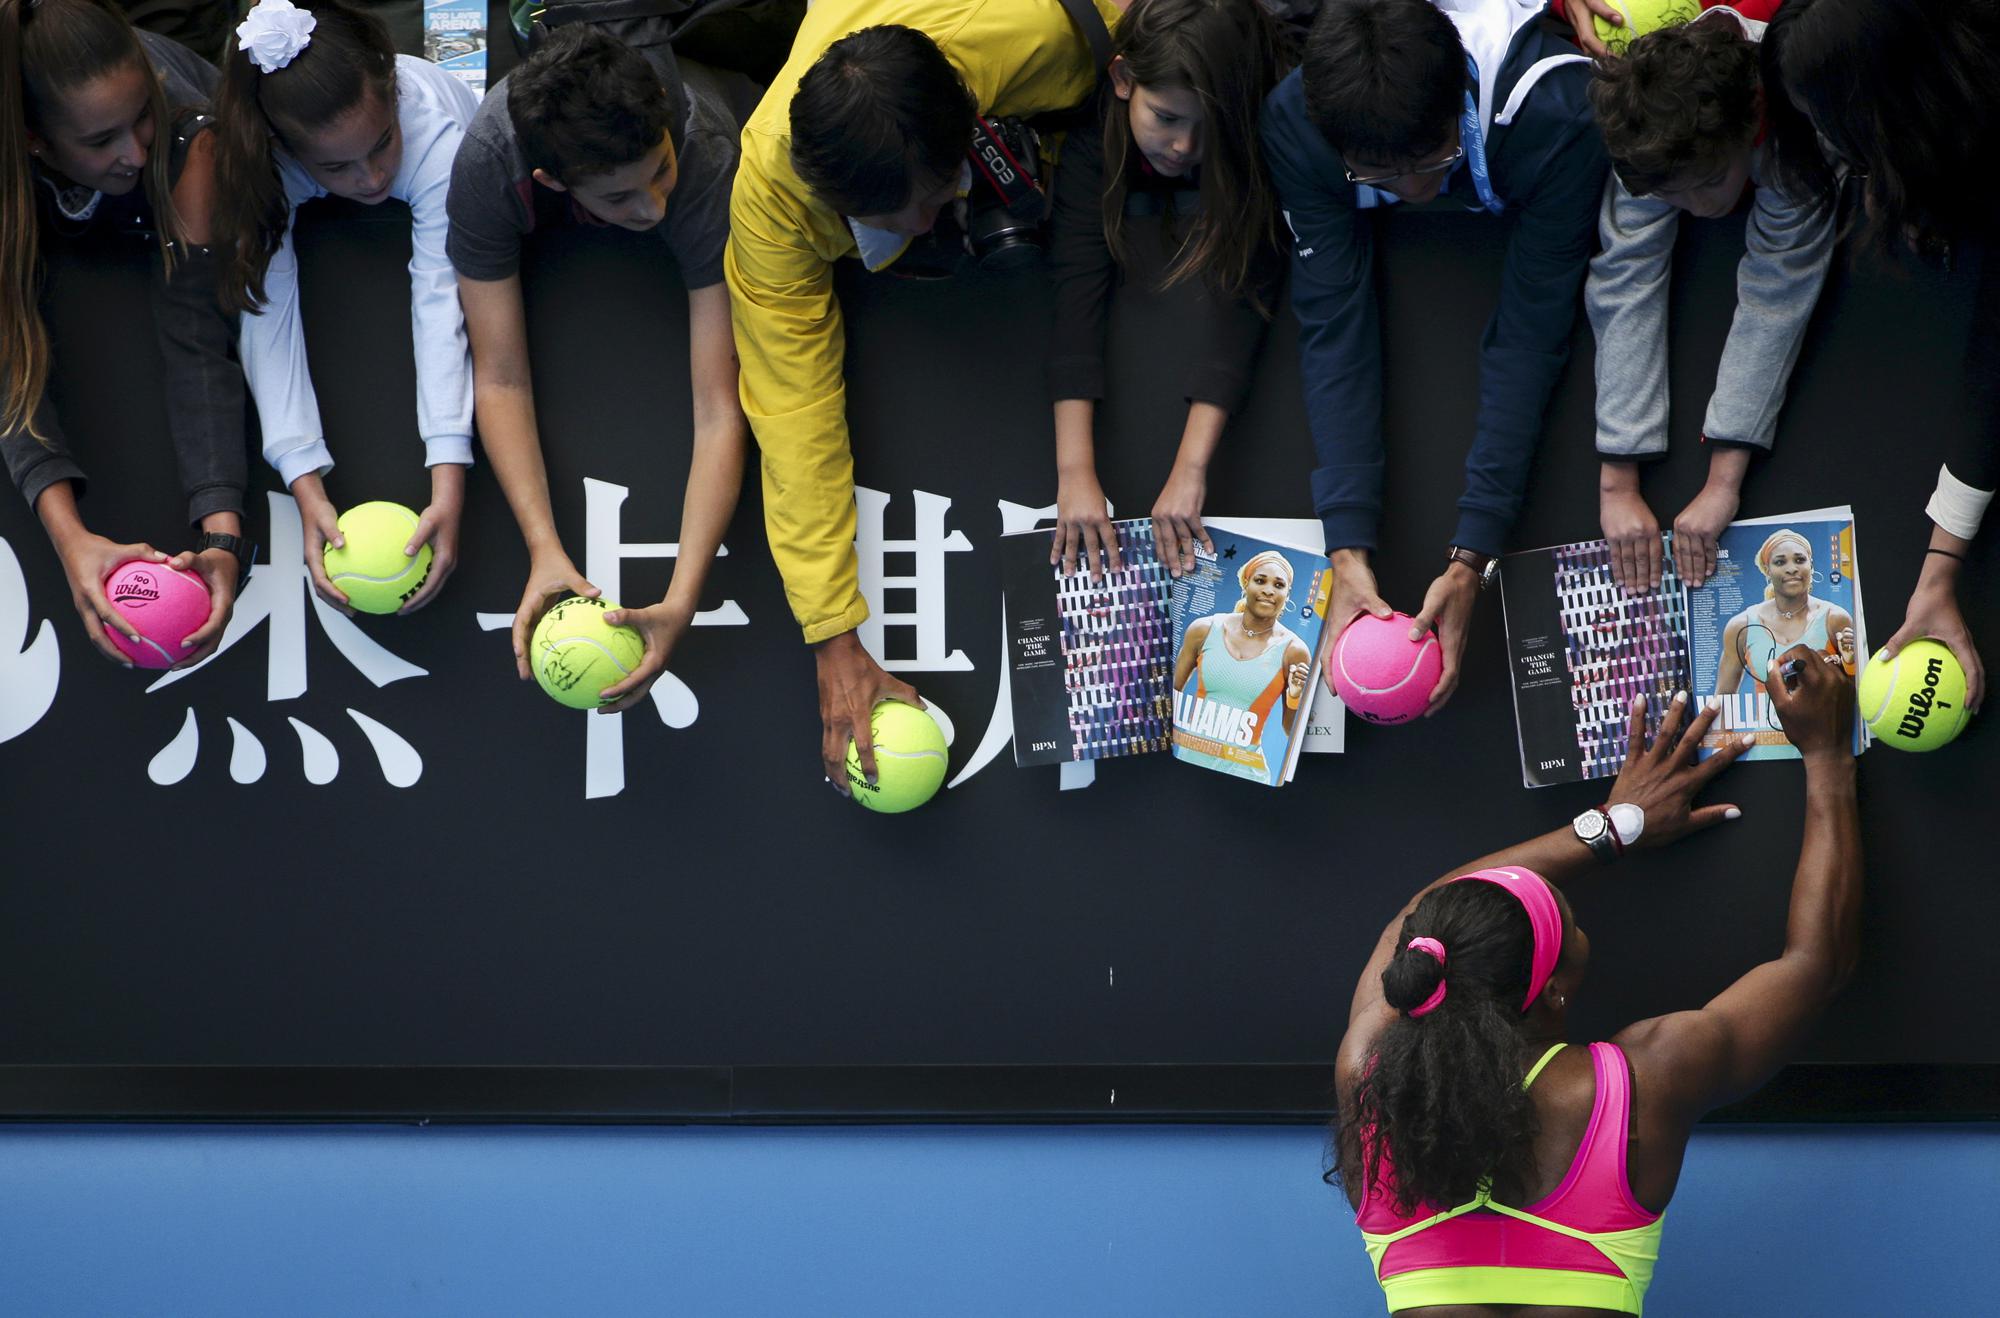 FILE - Serena Williams of the U.S. signs autographs for fans after defeating Garbine Muguruza of Spain in their fourth round match at the Australian Open tennis championship in Melbourne, Australia, Monday, Jan. 26, 2015. After nearly three decades in the public eye, few can match Serena Williams' array of accomplishments, medals and awards. Through it all, the 23-time Grand Slam title winner hasn't let the public forget that she's a Black American woman who embraces her responsibility as a beacon for her people. (AP Photo/Rob Griffith, File)